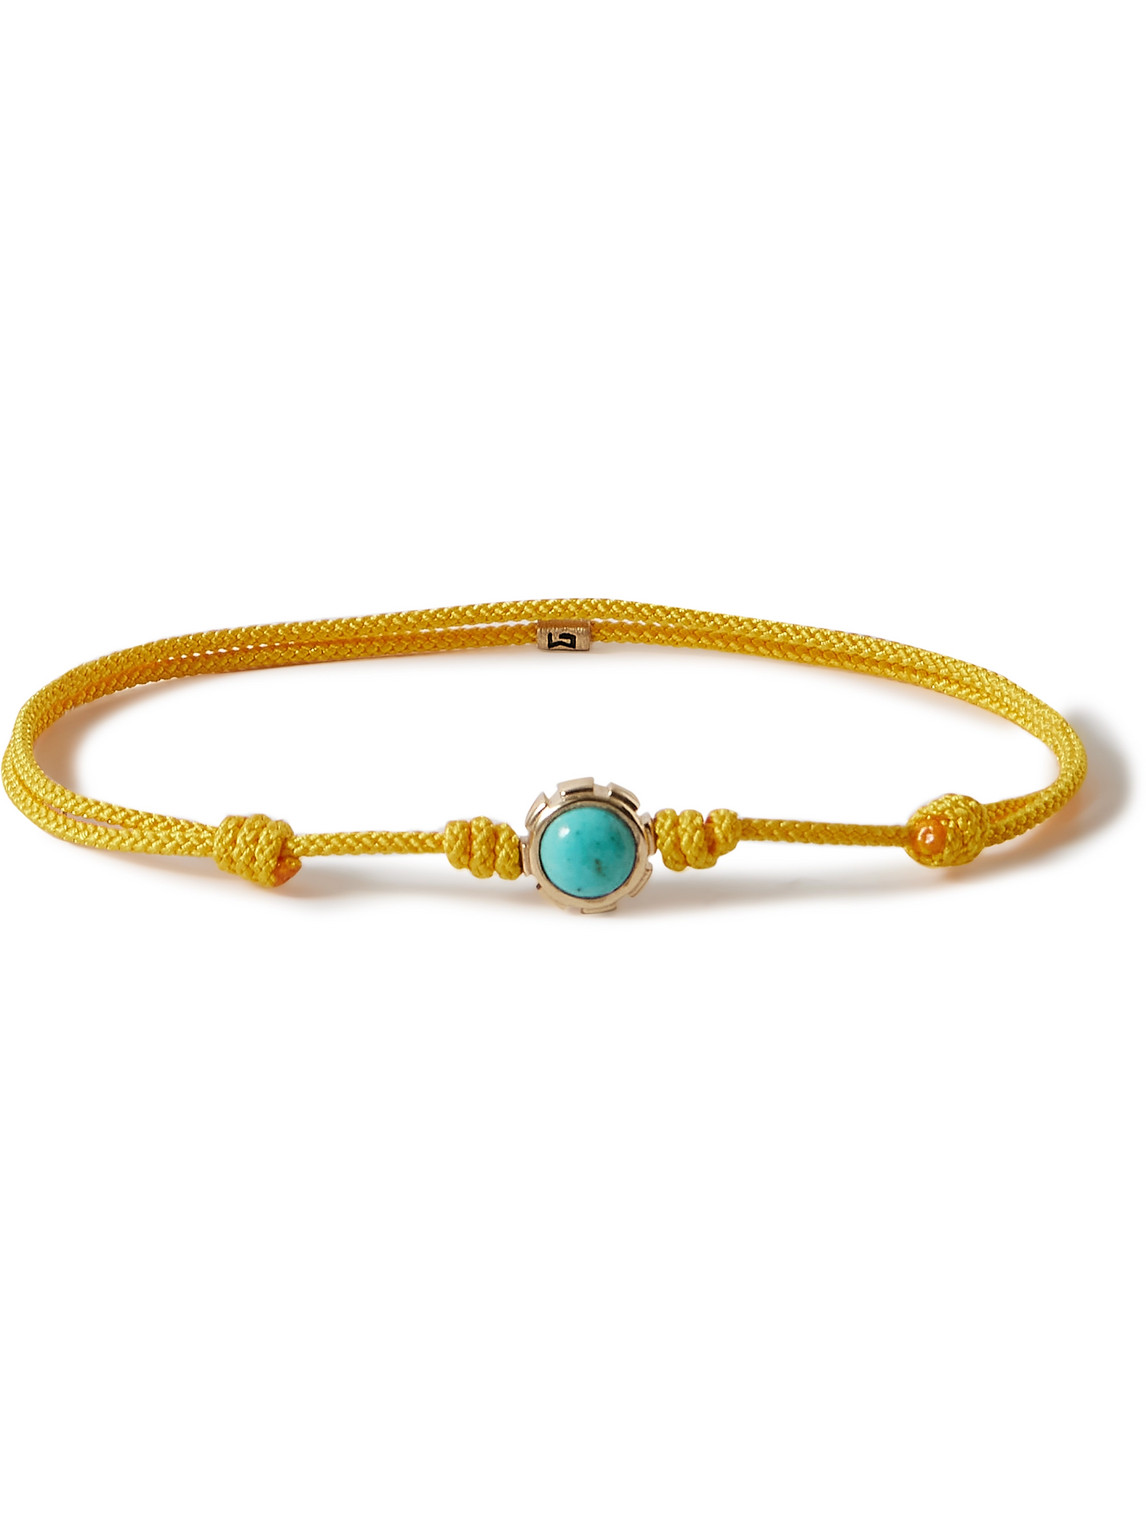 Luis Morais Gold, Turquoise, Tiger's Eye And Cord Bracelet In Yellow